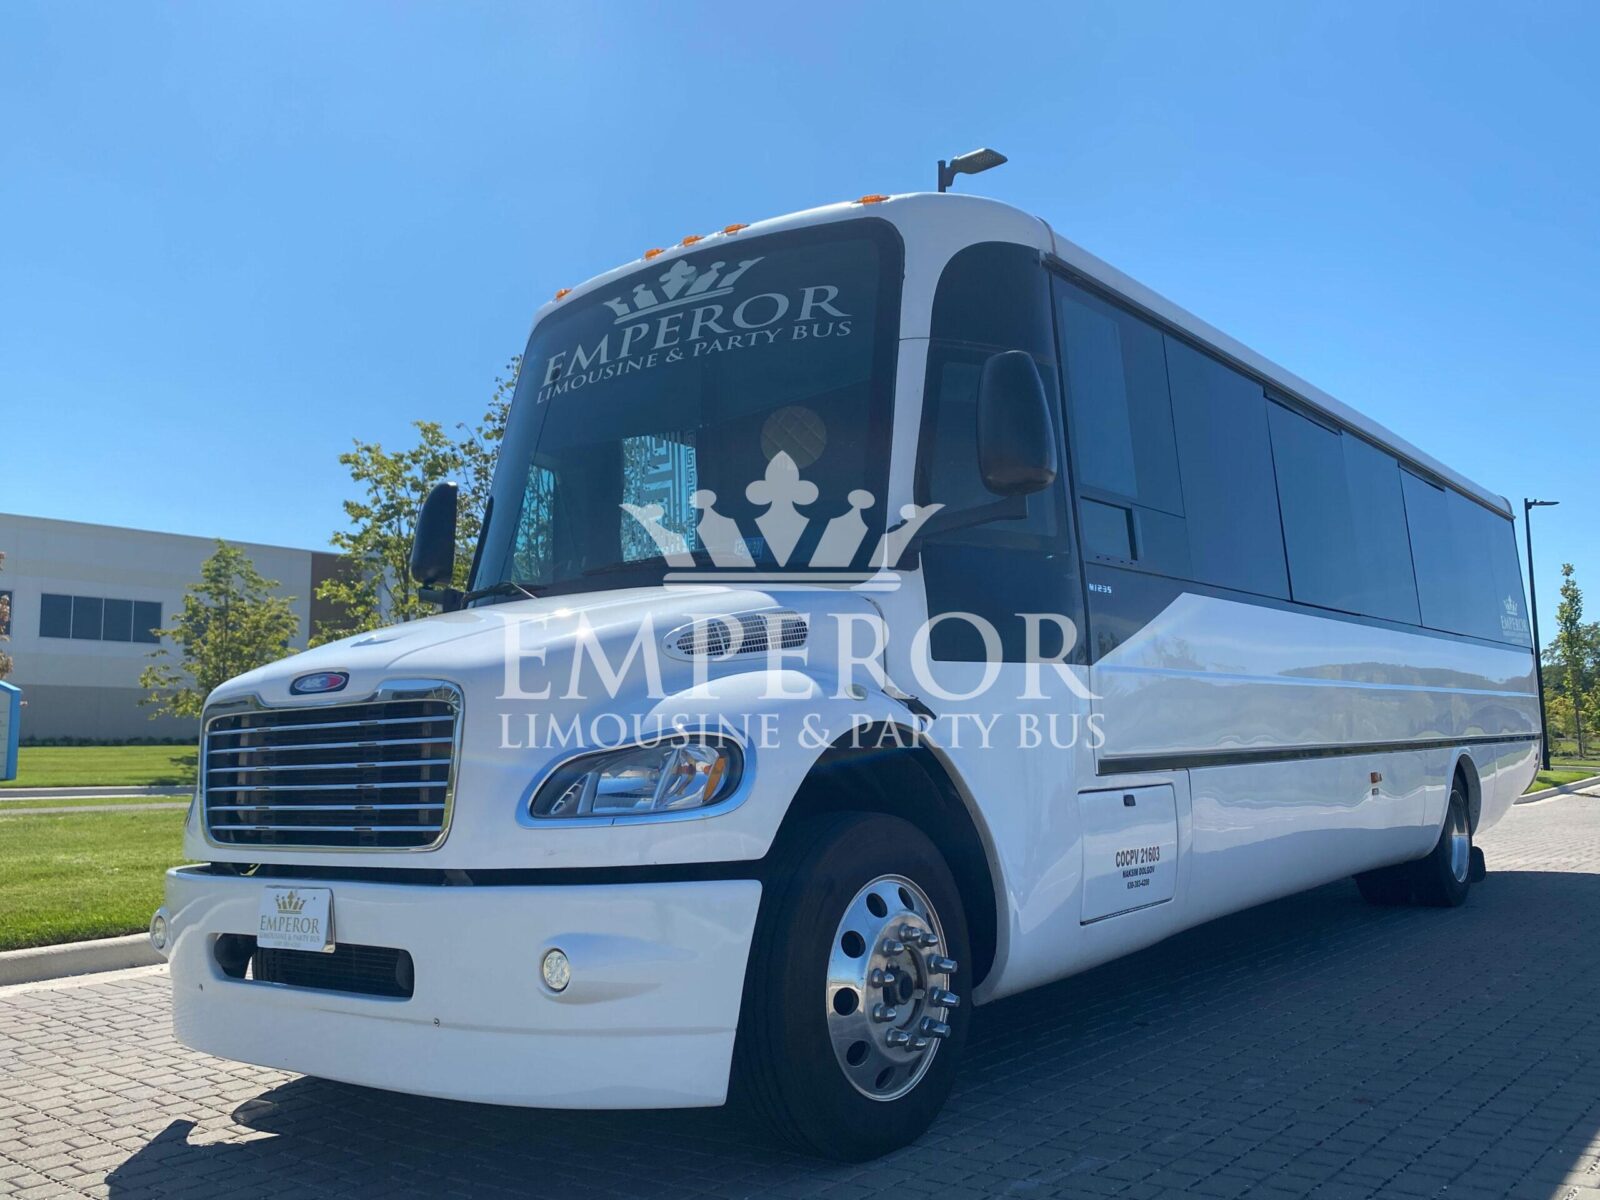 Party bus rental service in Hanover Park